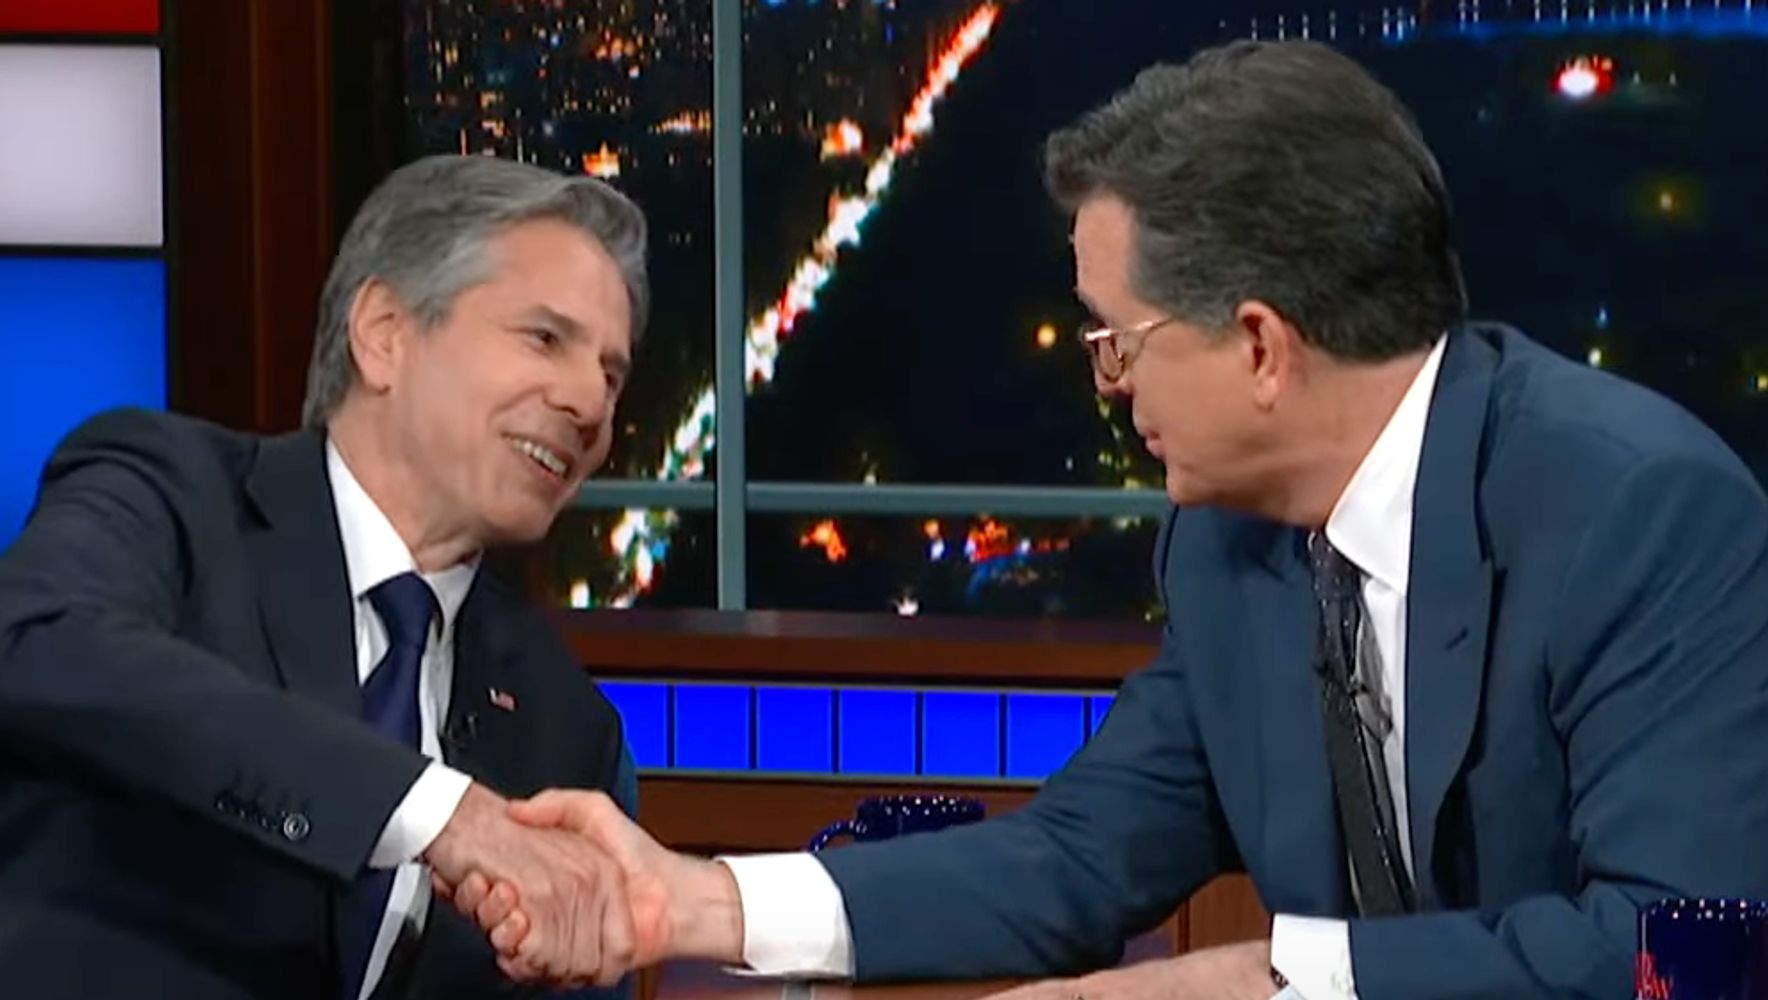 Secretary Of State Antony Blinken Ends ‘Late Show’ Interview In Surprising Way